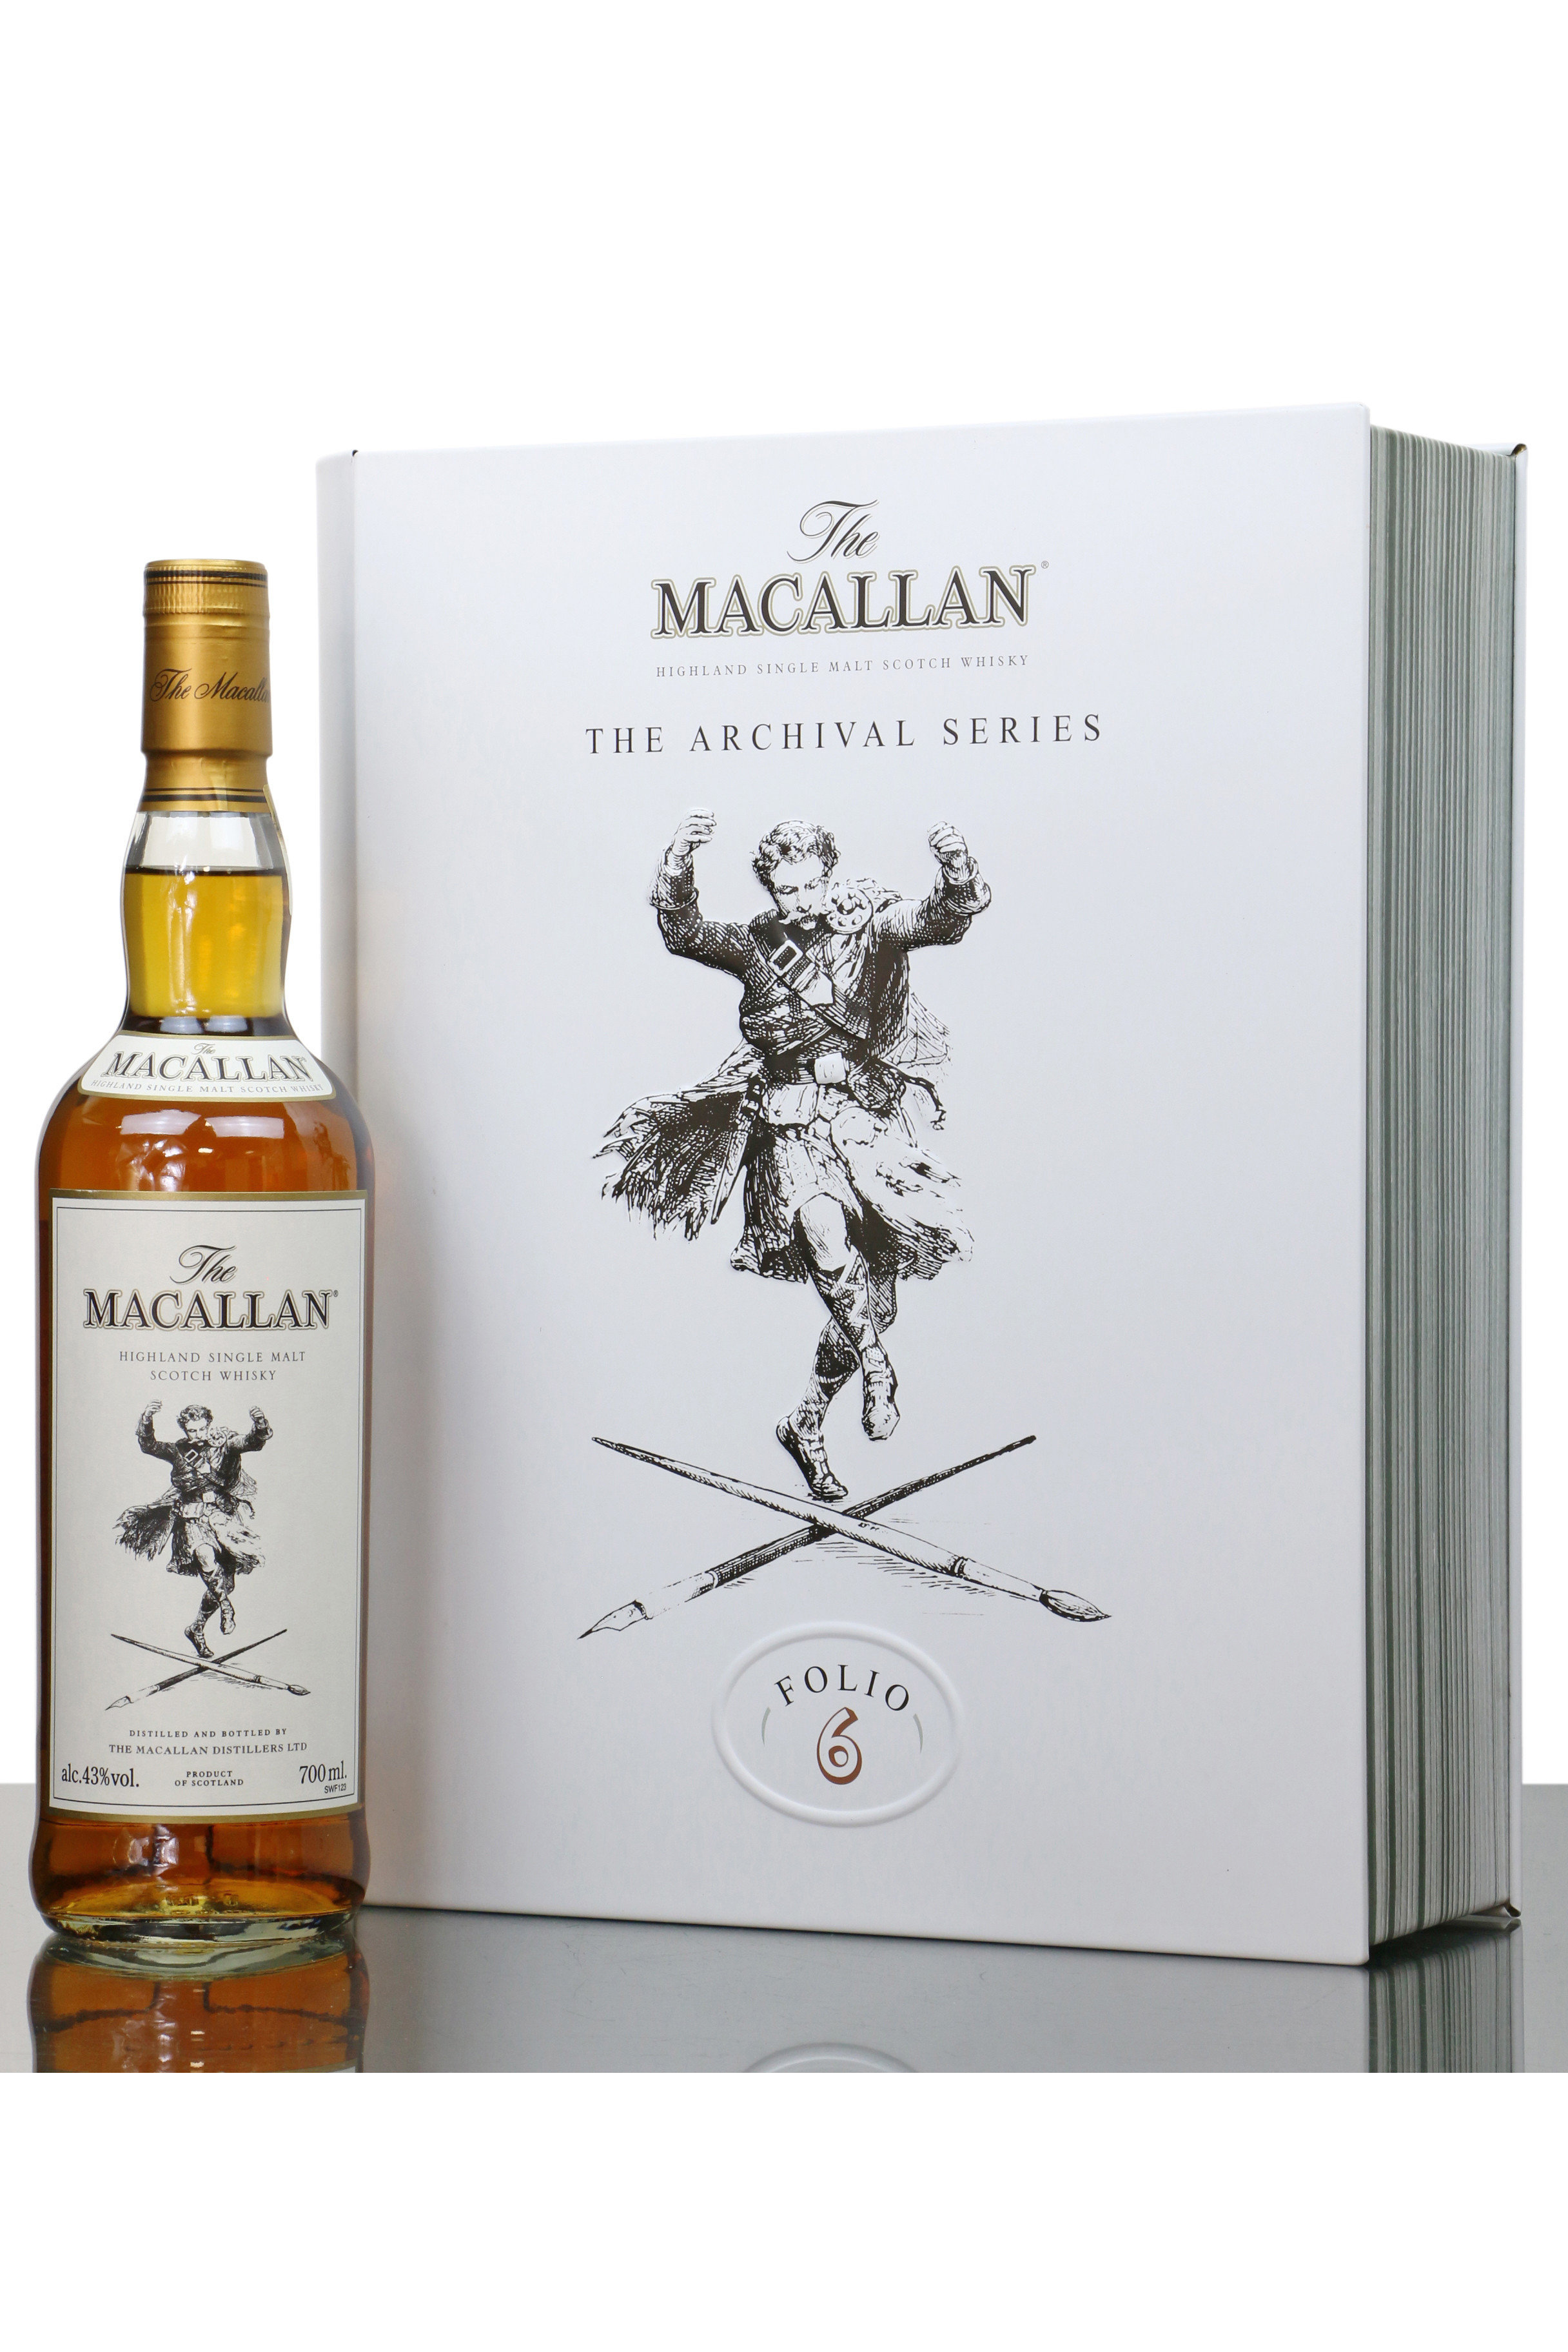 Macallan The Archival Series - Folio 6 - Just Whisky Auctions